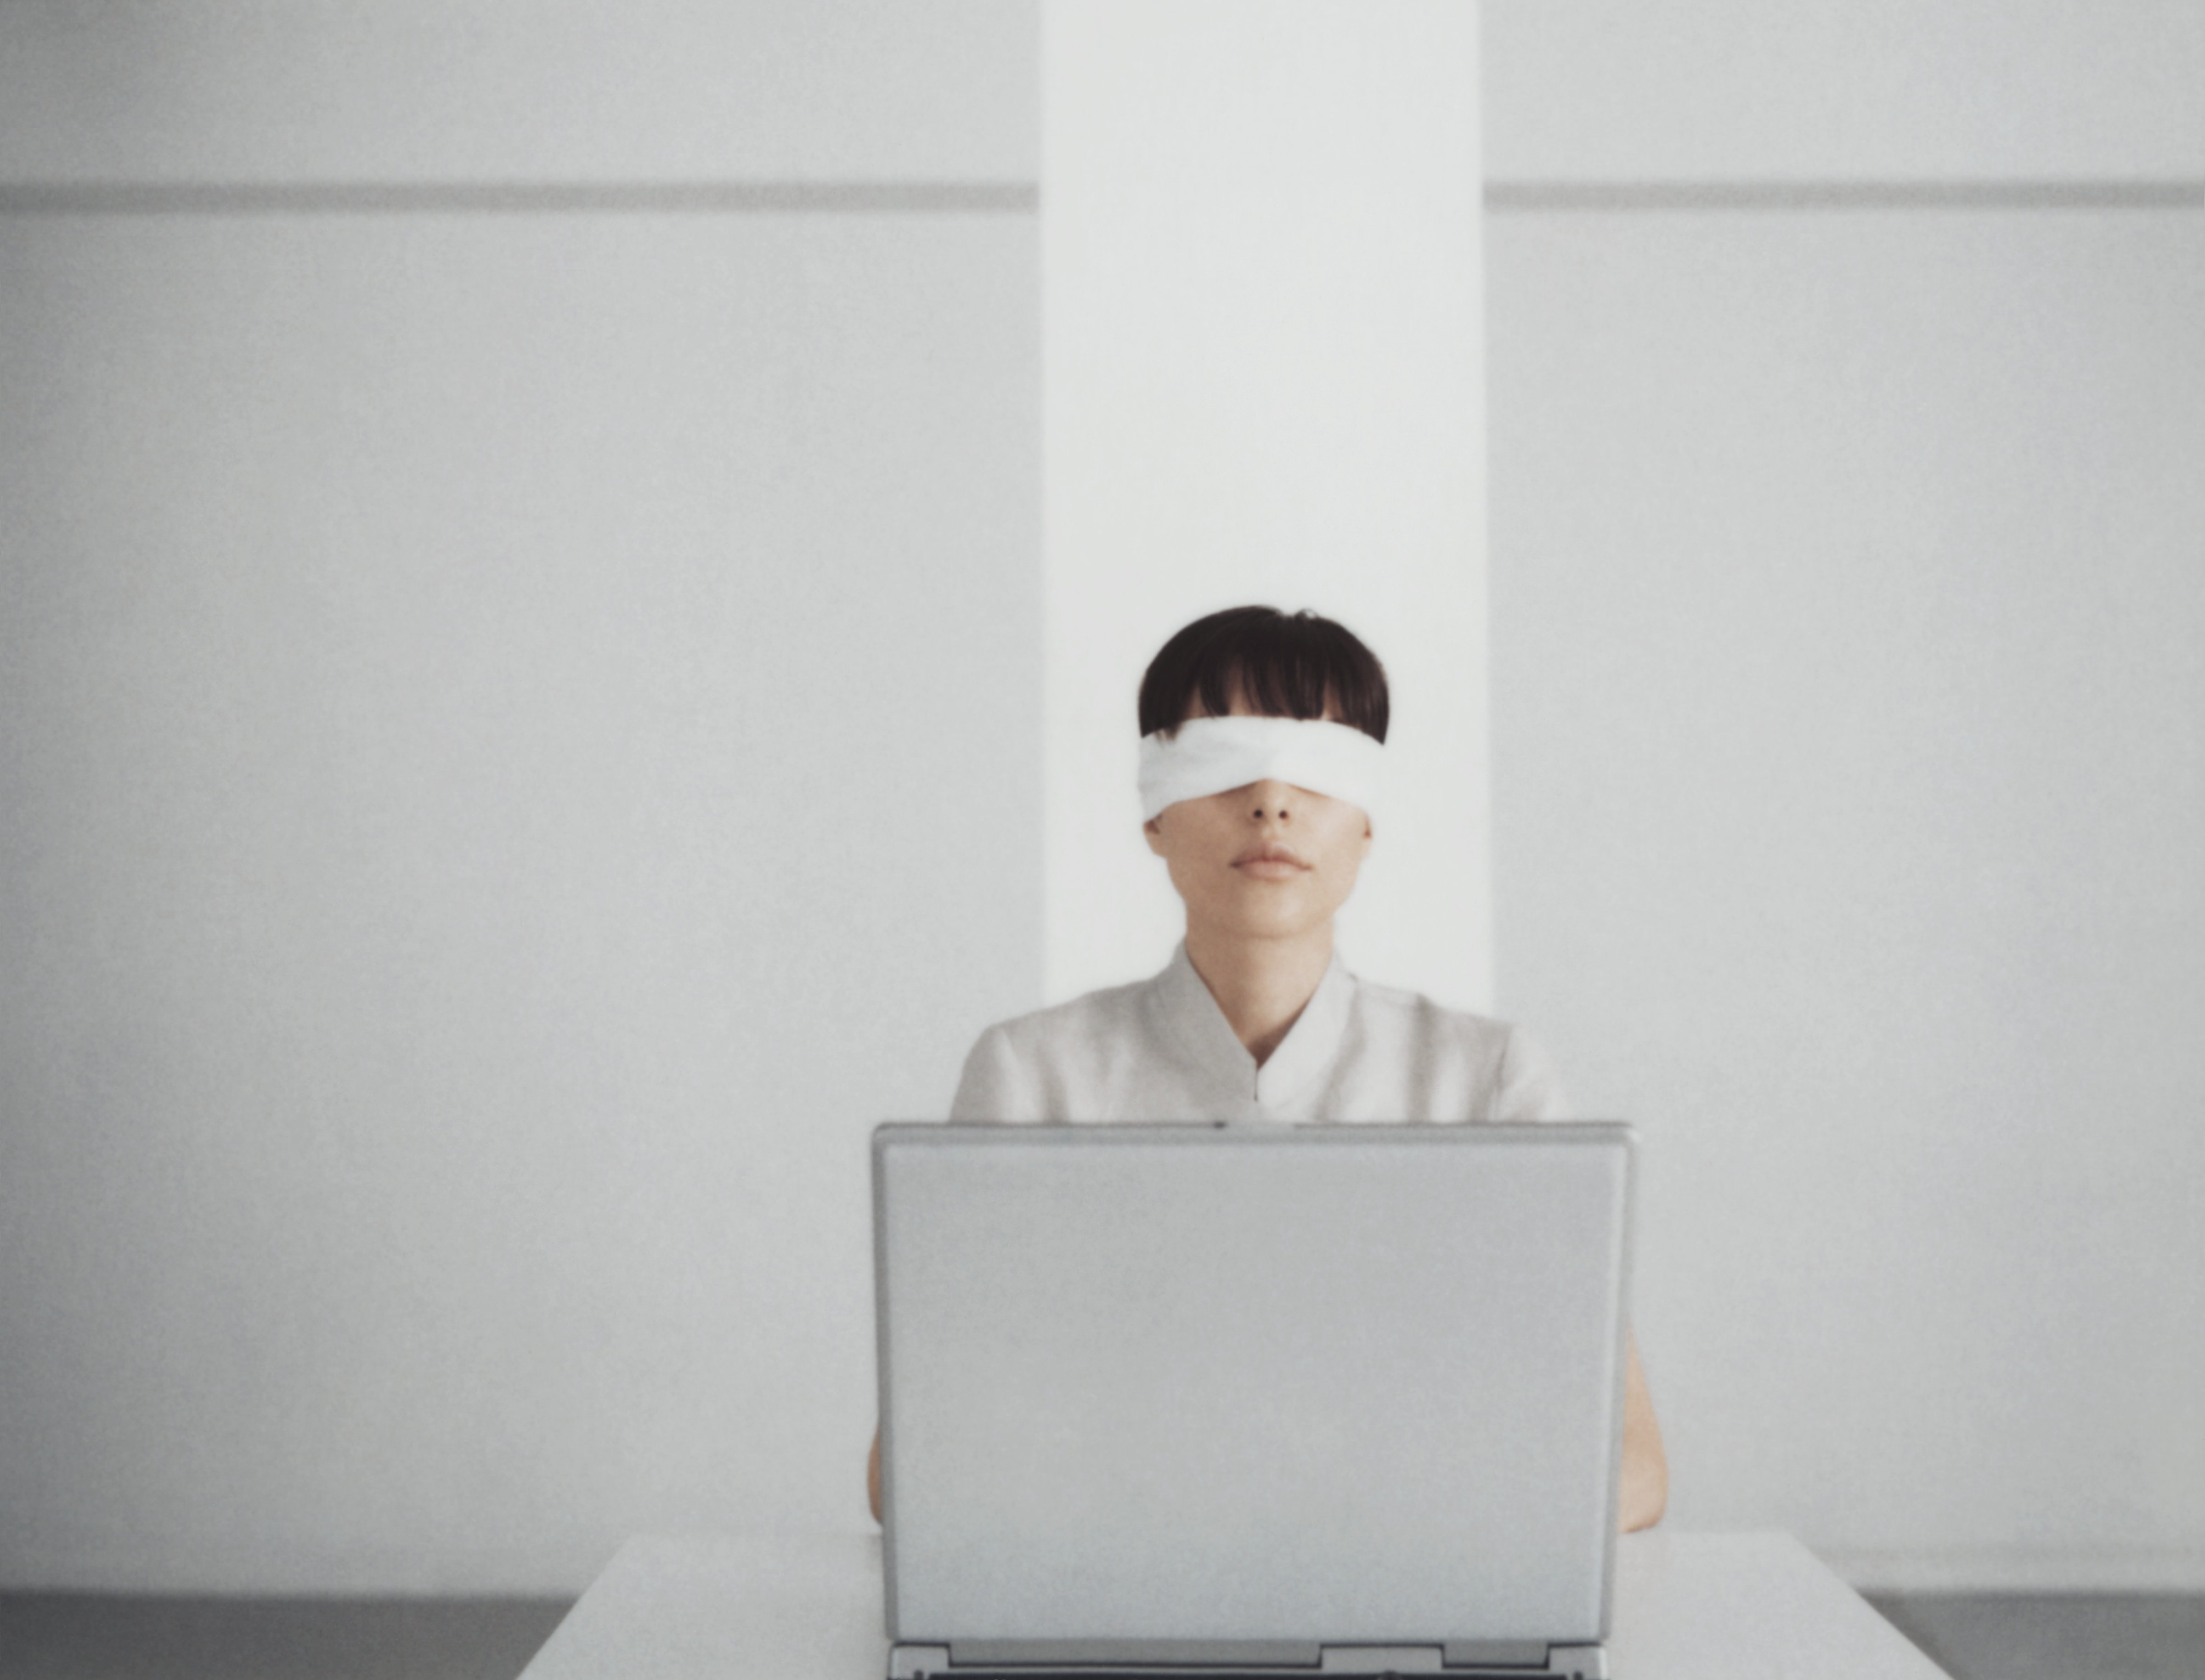 Blindfolded woman sitting behind laptop (Getty Images)